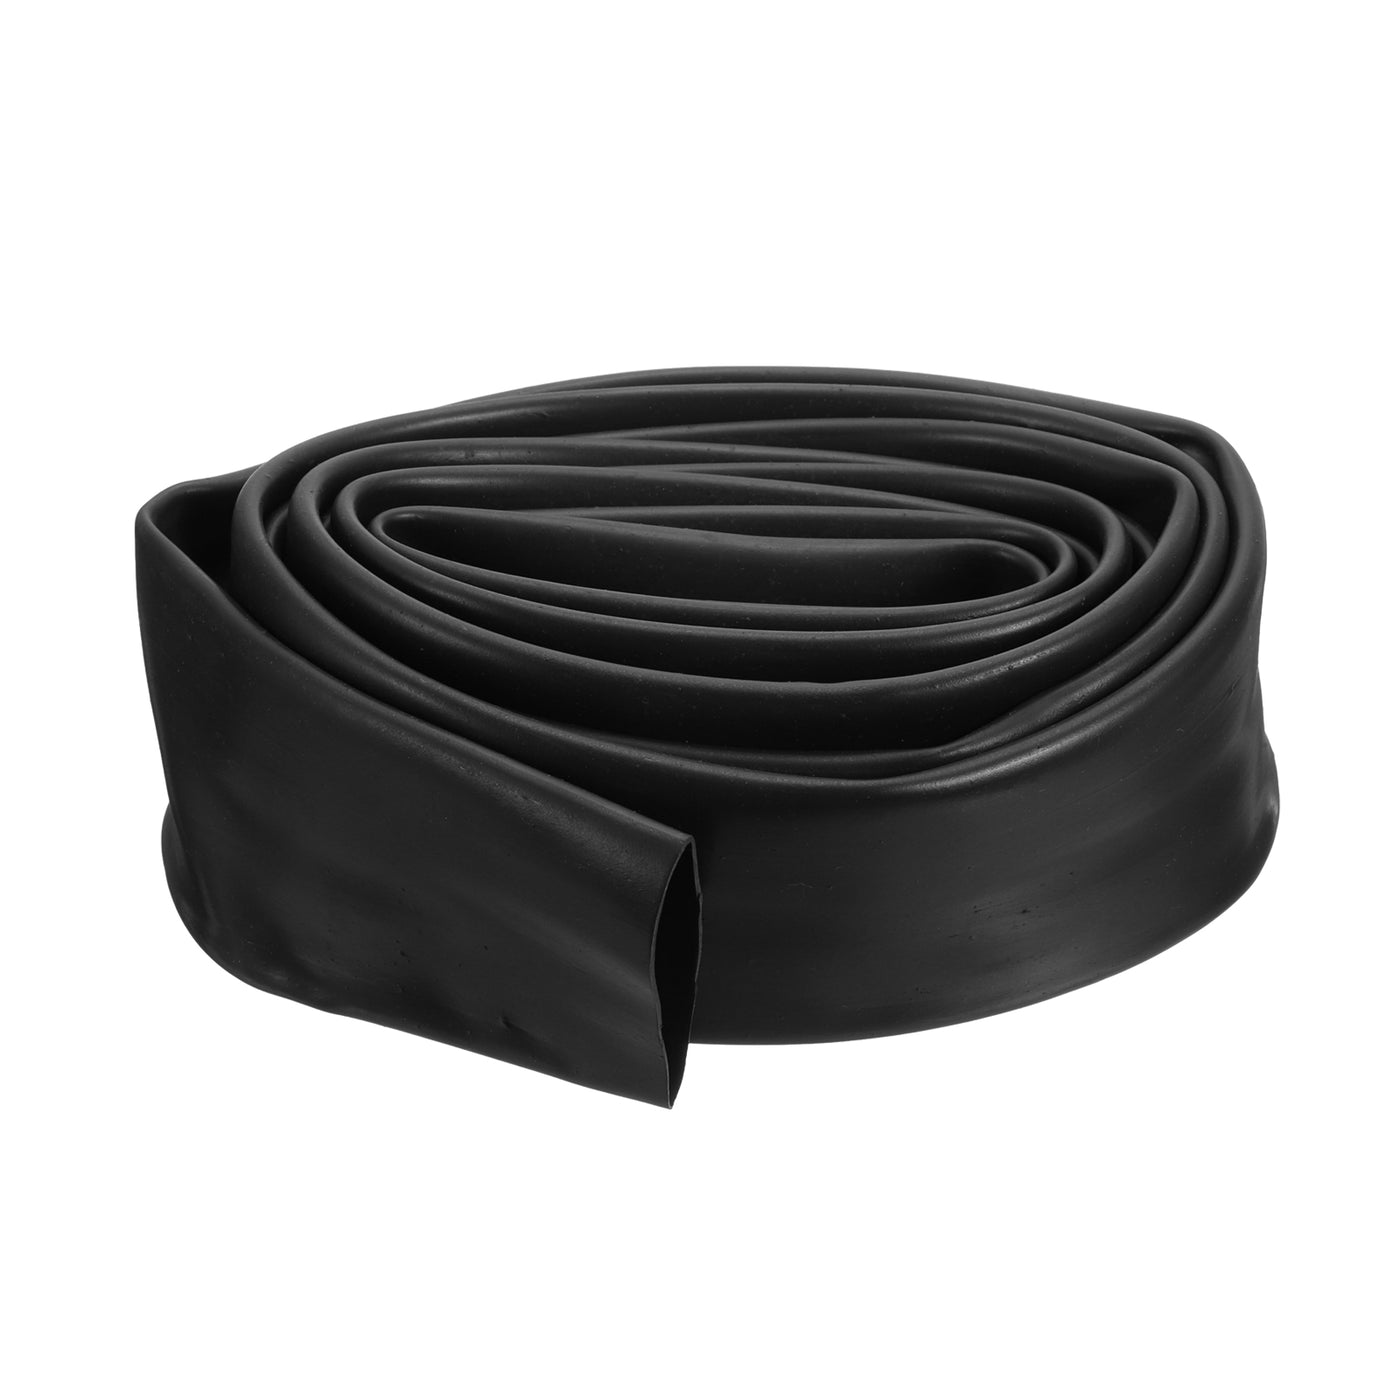 uxcell Uxcell Black PVC Tube Wire Harness Tubing, 40mm ID 10ft Sleeve for Wire Sheathing Wire Protection